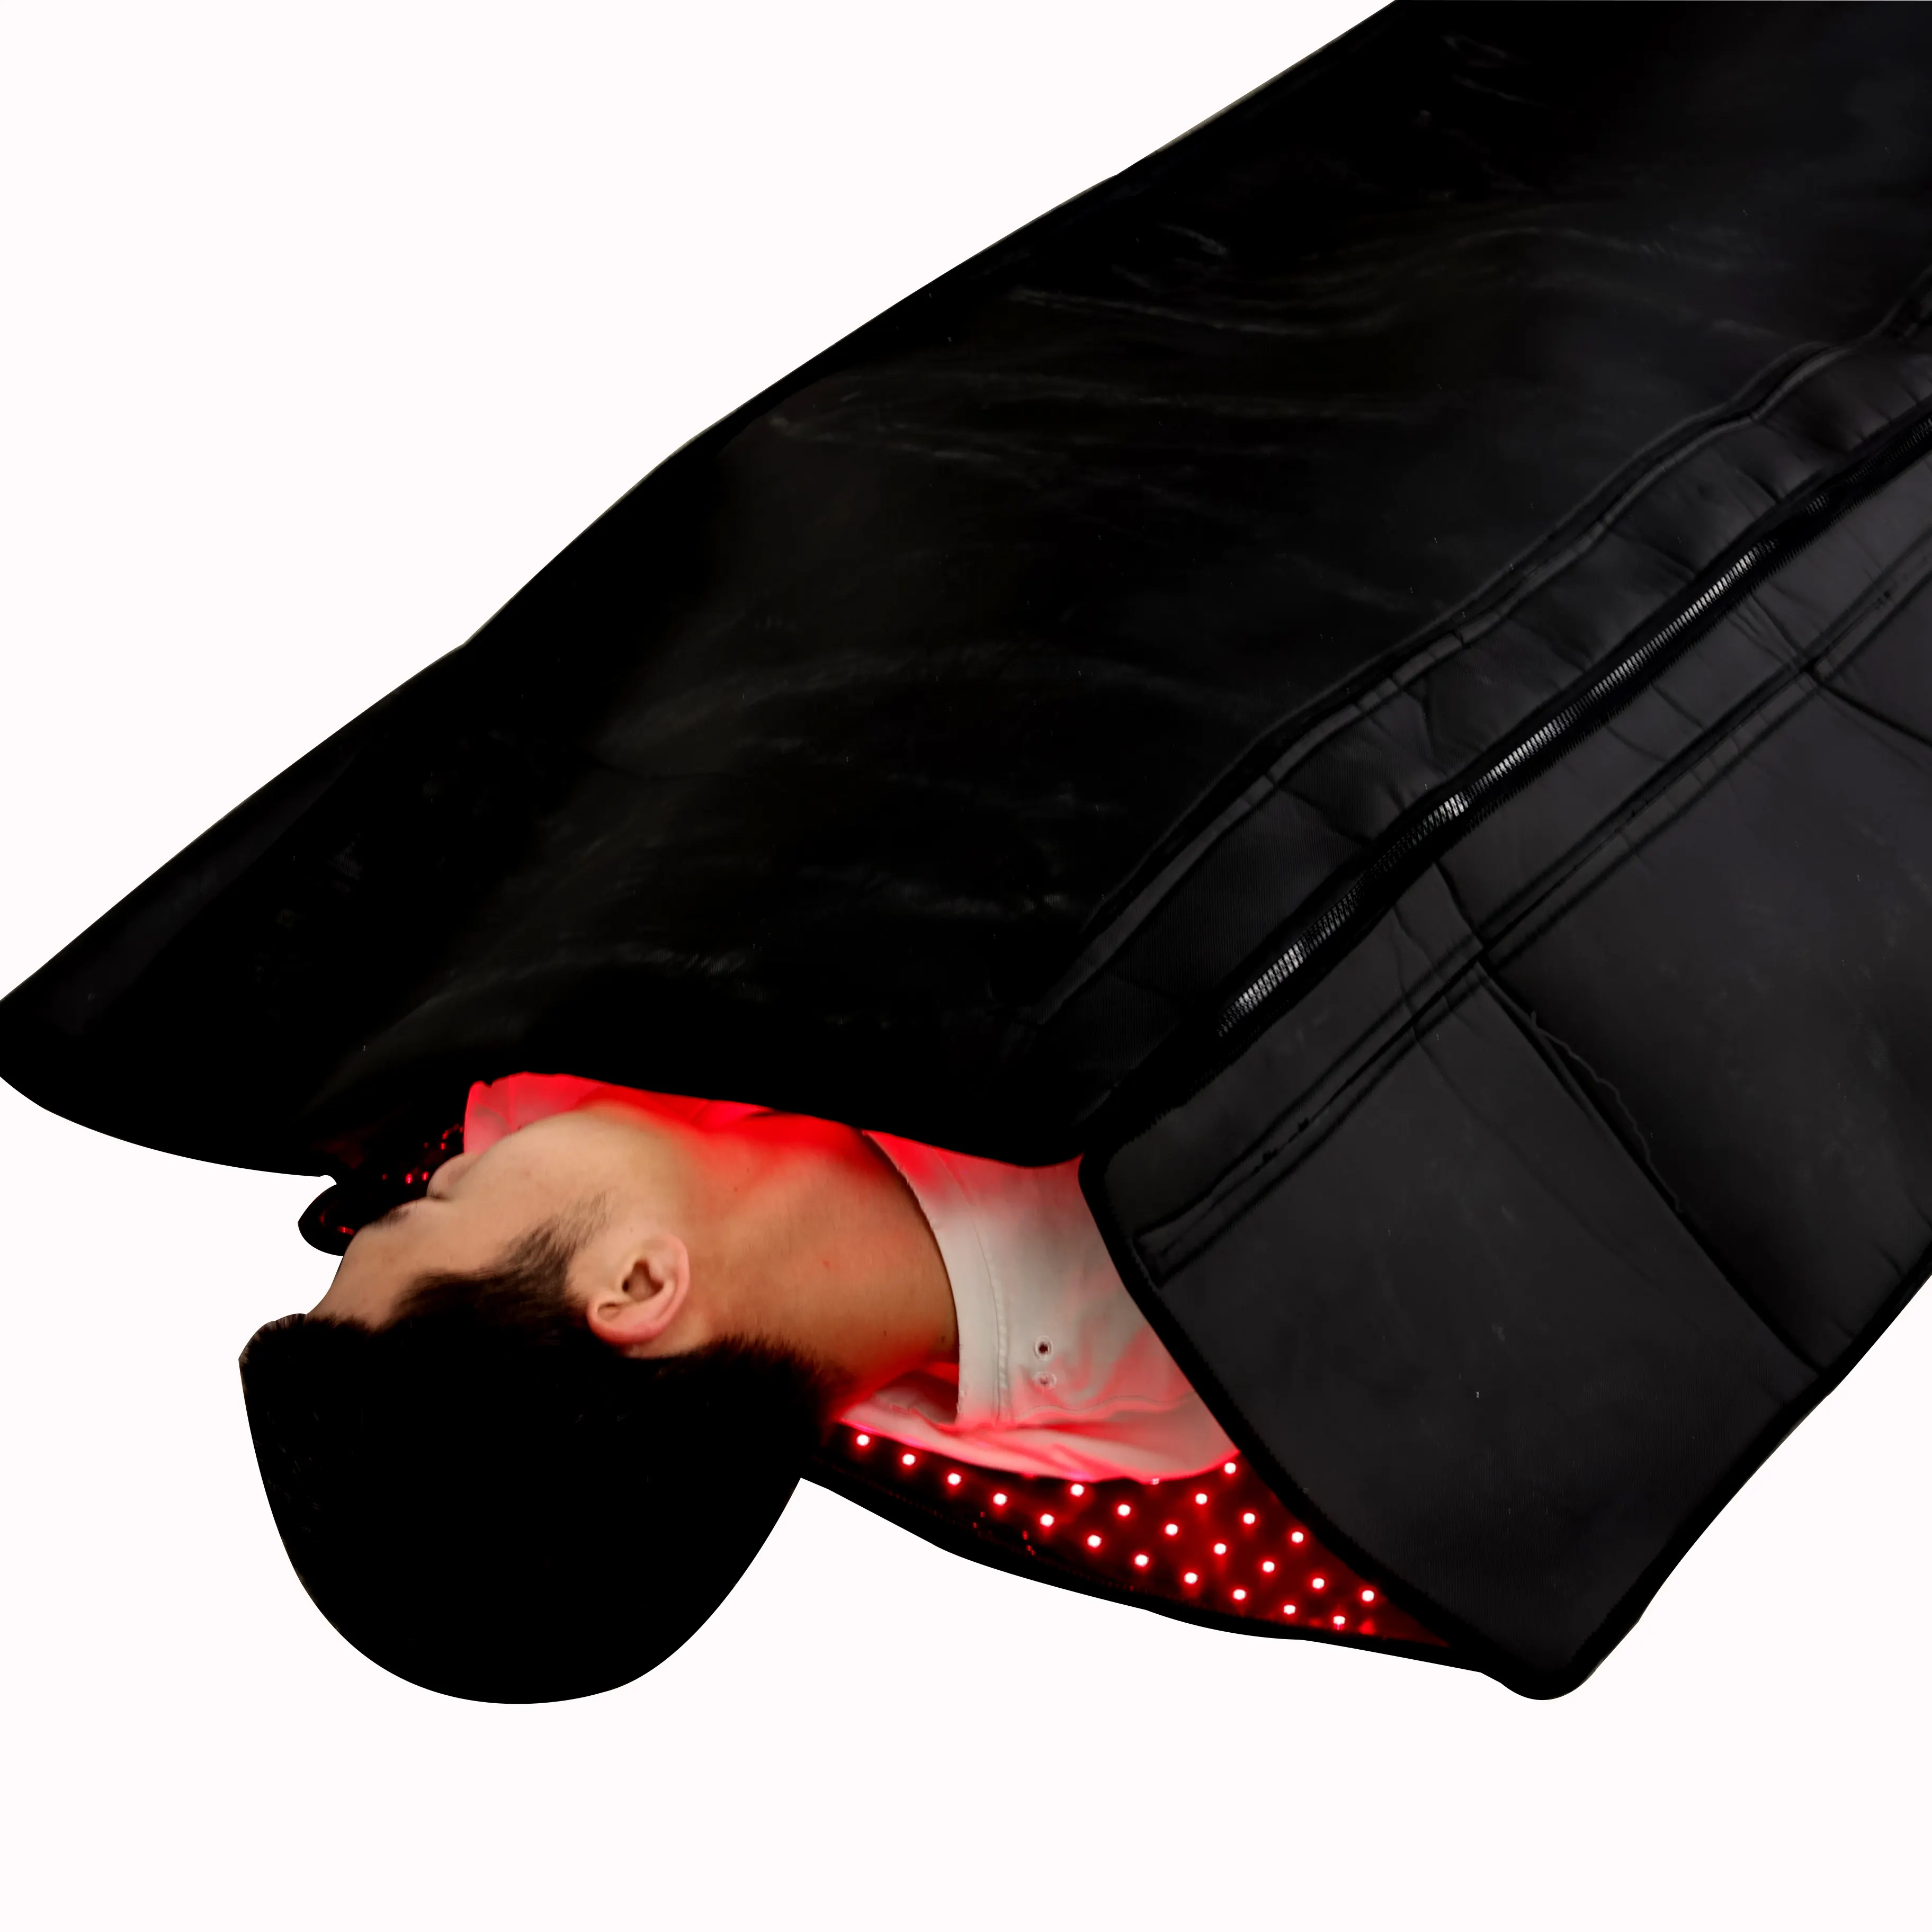 Beauty Salon Big Size 68.6x25inch Full Body Red Light Therapy Blanket Bag